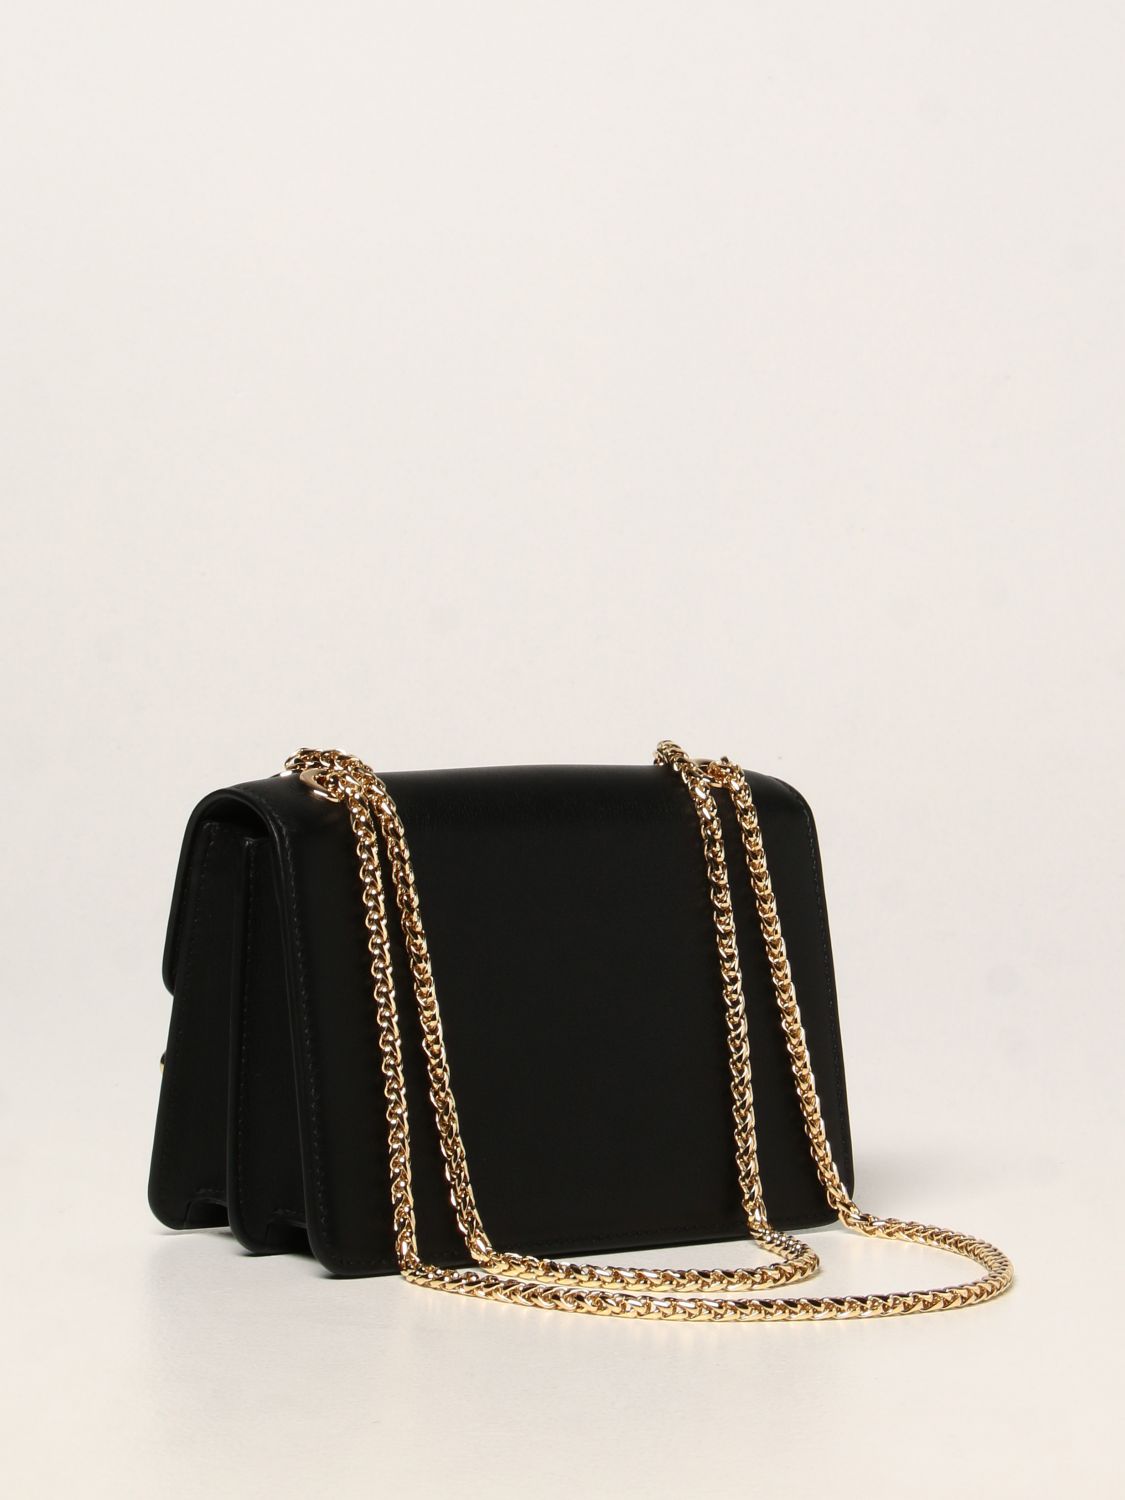 STRATHBERRY: East / West mini leather bag - Black | Strathberry mini ...